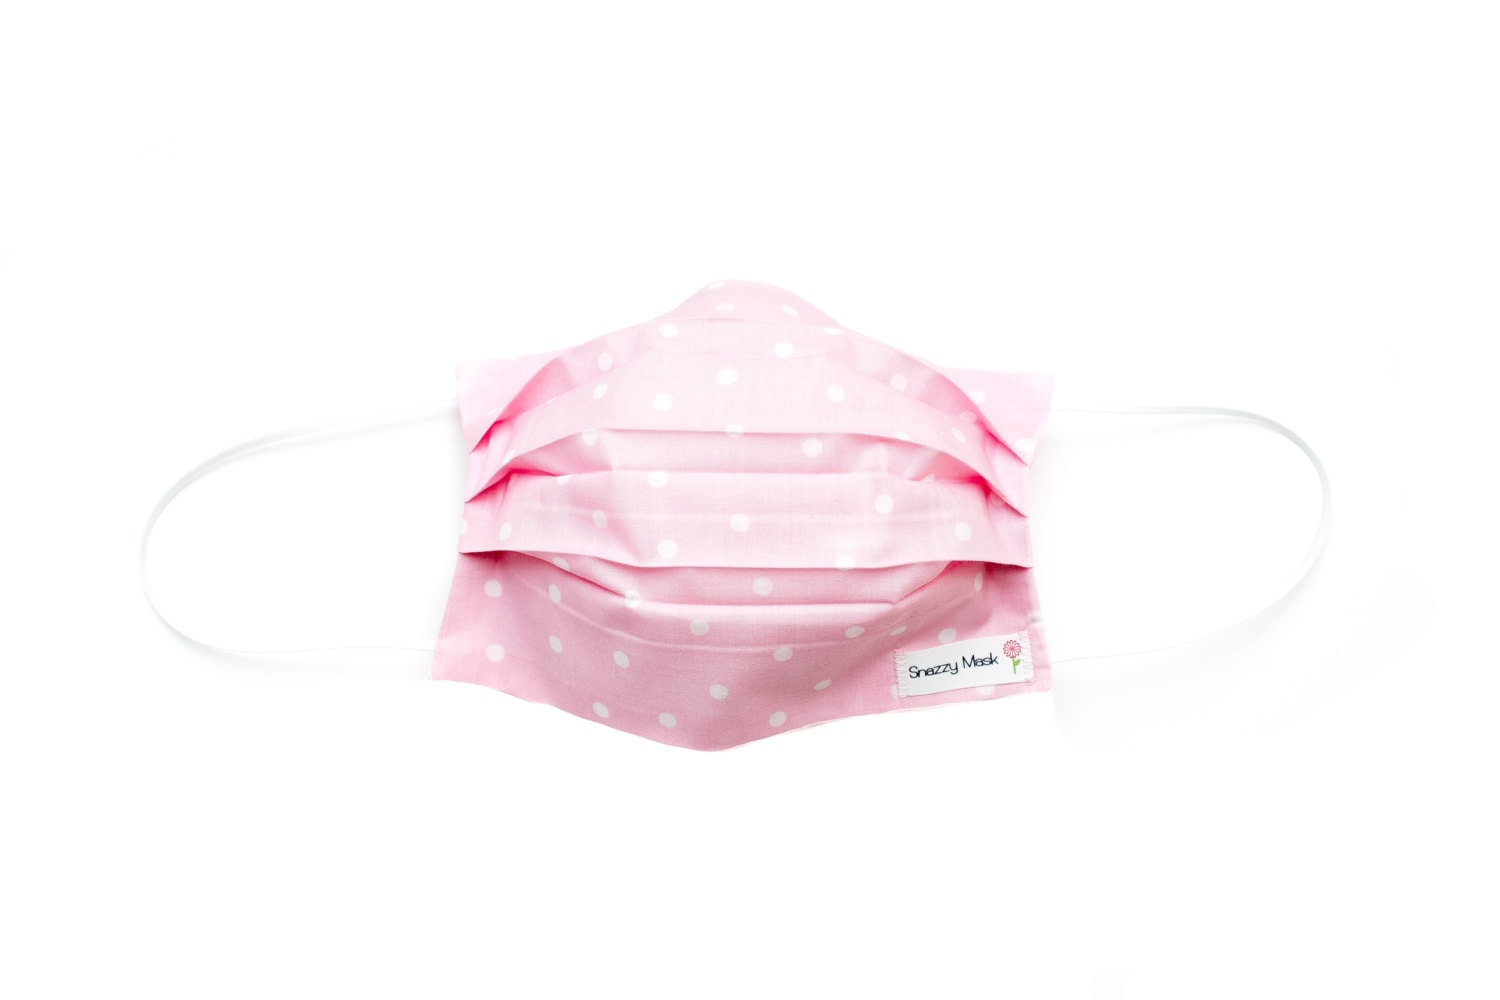 Youth's Surgical Mask Pink Face Mask Surgical Face